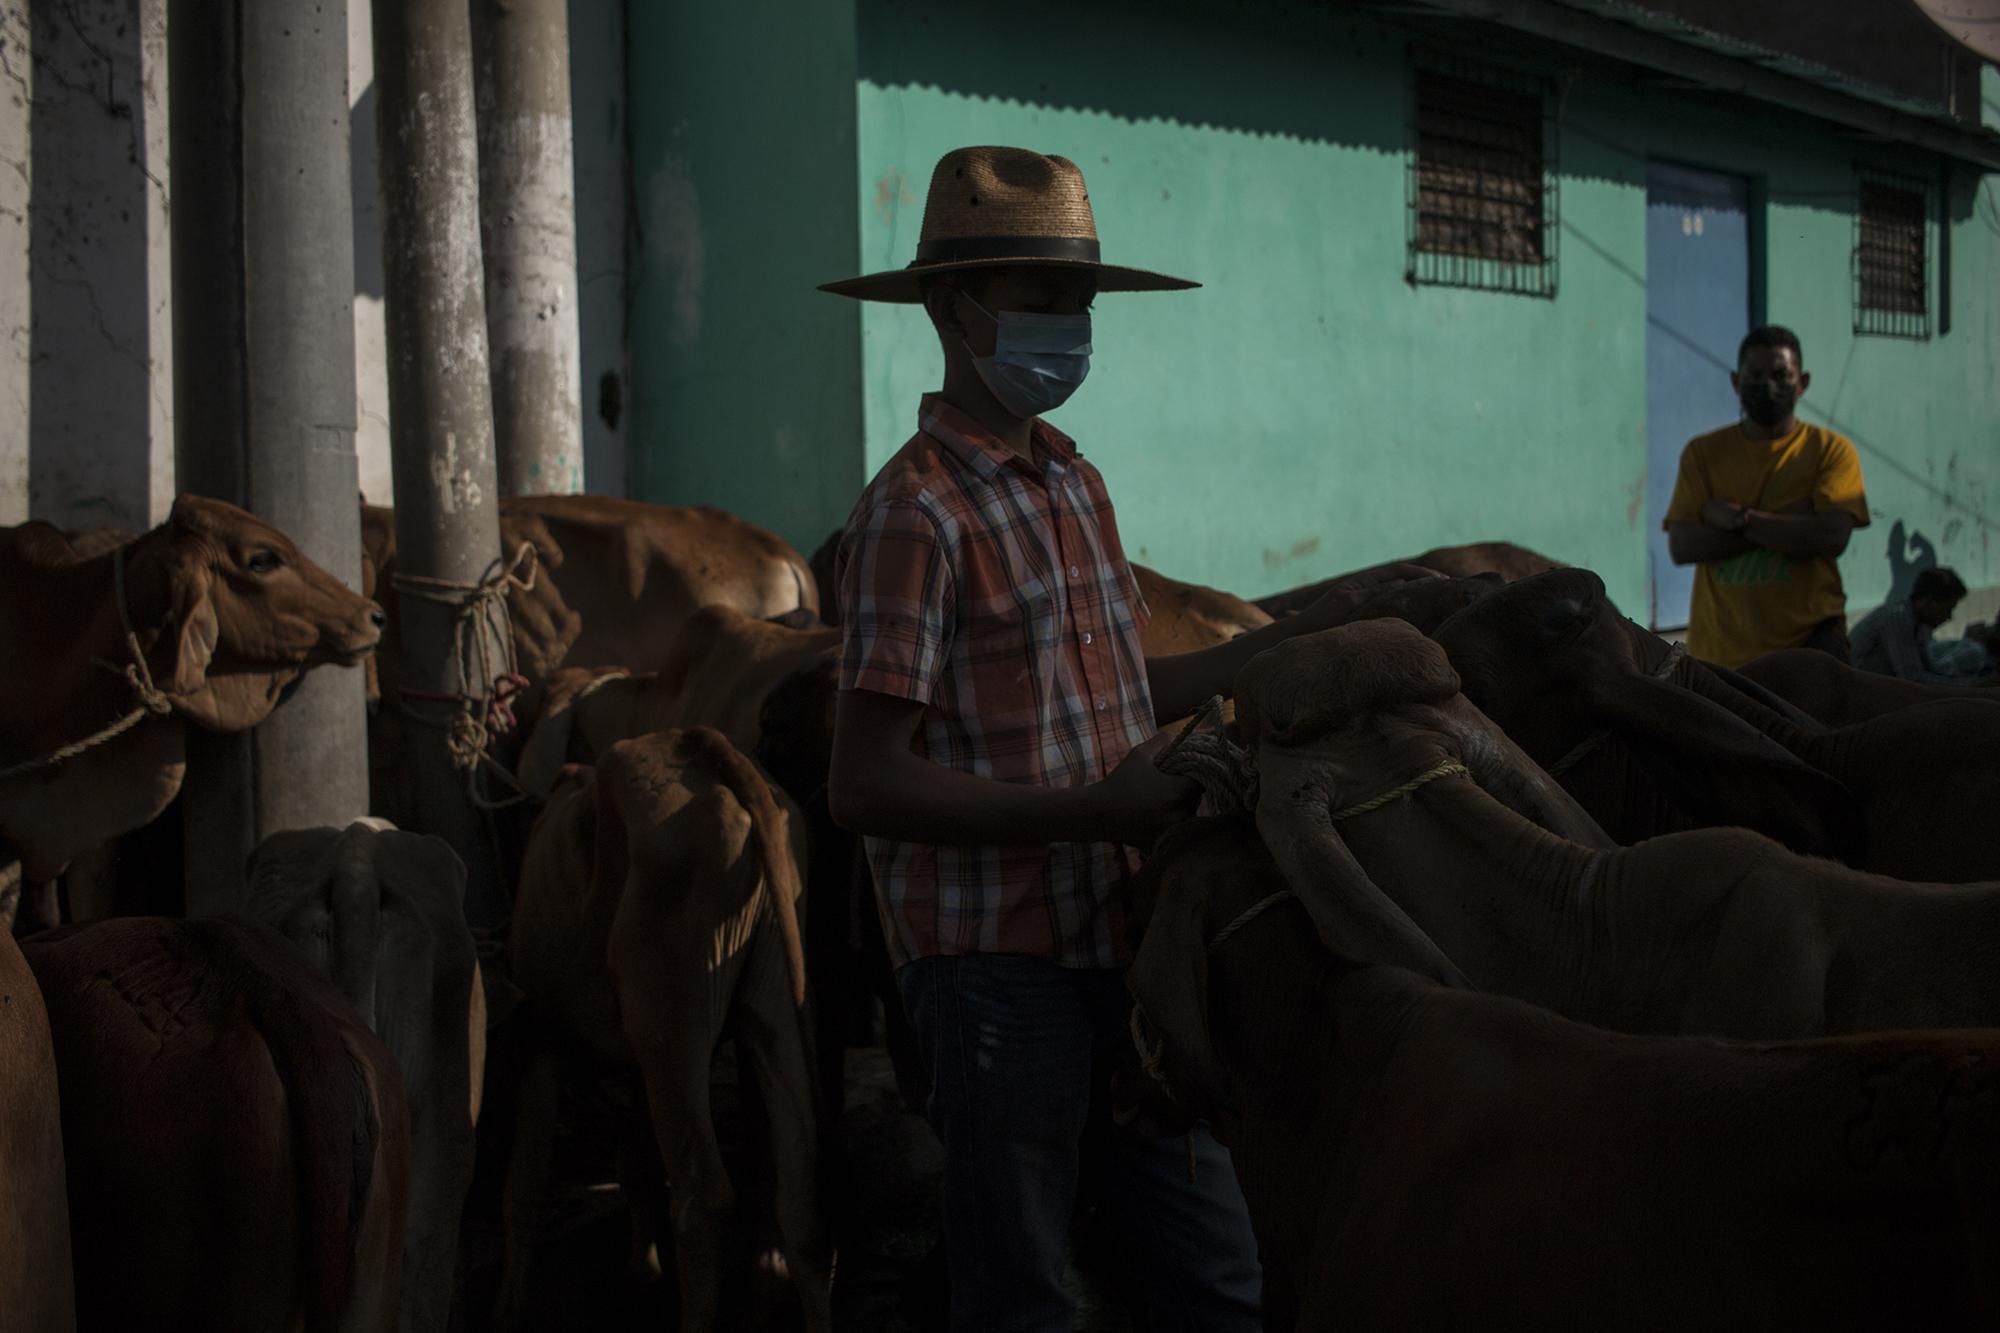 Josué Castro, 15, is a livestock dealer. Every Saturday, he arrives with his father to buy and sell. Josué is a resident of the rural zone of San Rafael Cedros and he takes advantage of the weekend to earn about $40, which covers his weekly expenses for school.